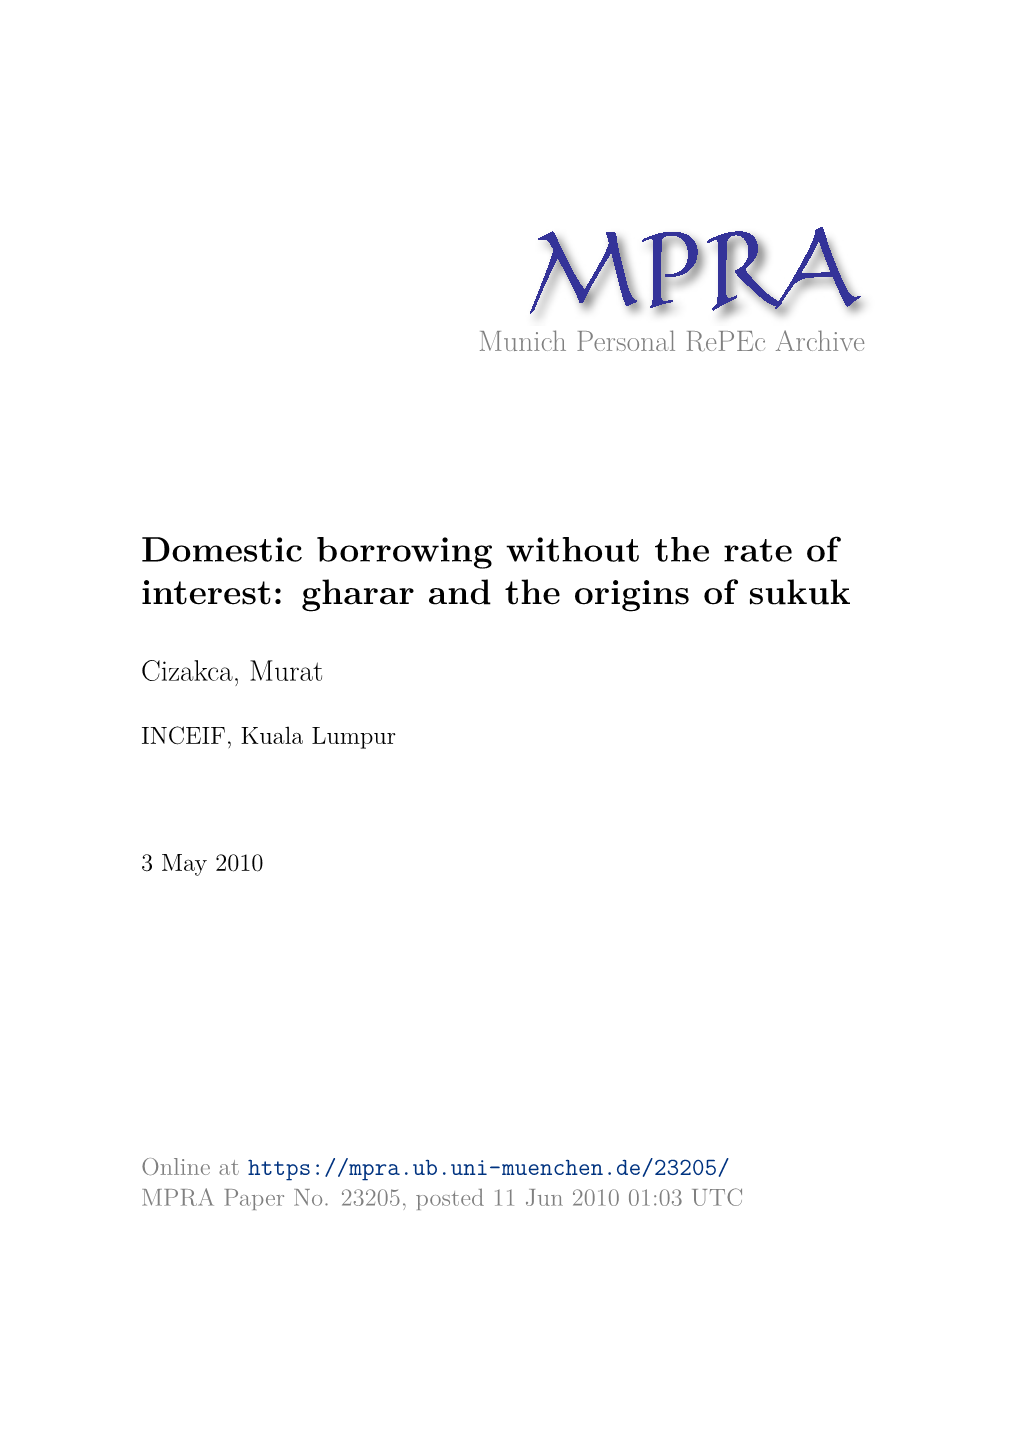 Domestic Borrowing Without the Rate of Interest: Gharar and the Origins of Sukuk